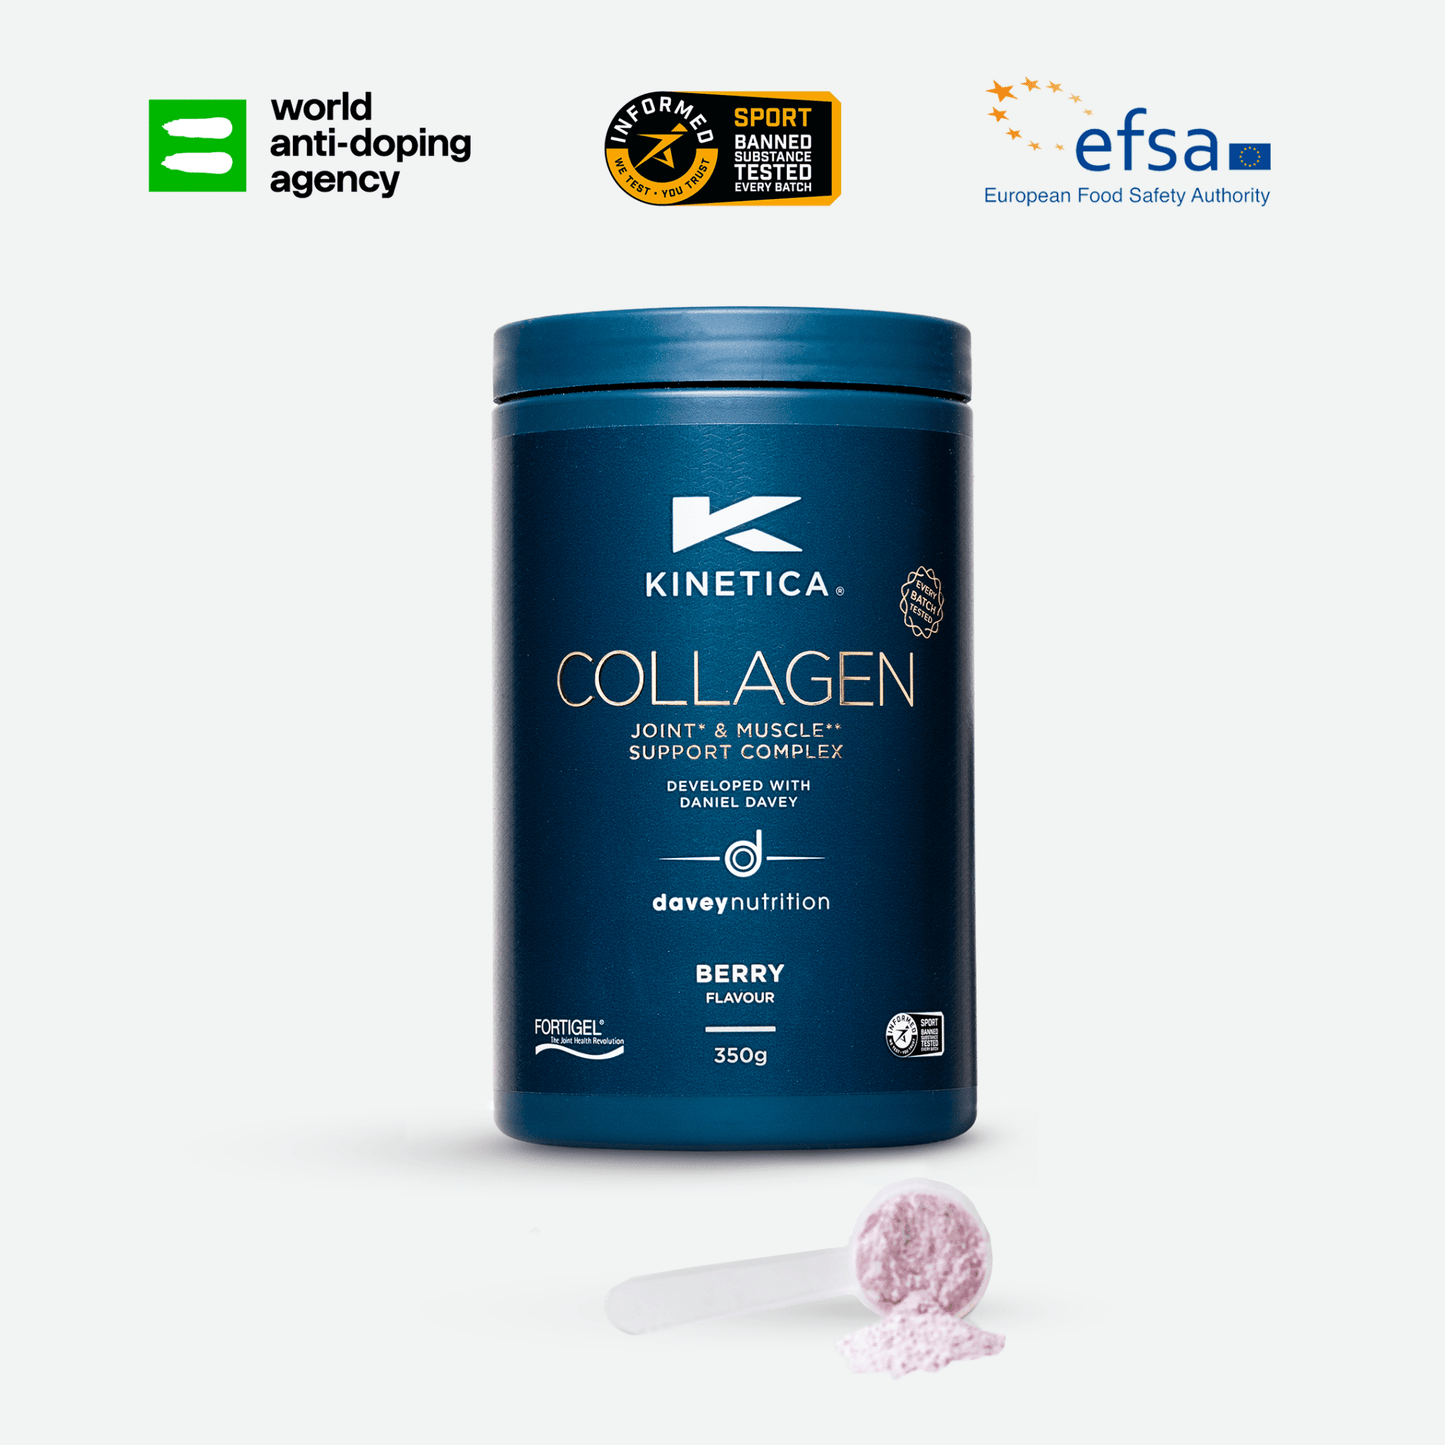 Collagen Powder Joint* & Muscle** Support Complex - 350g - Kinetica Sports